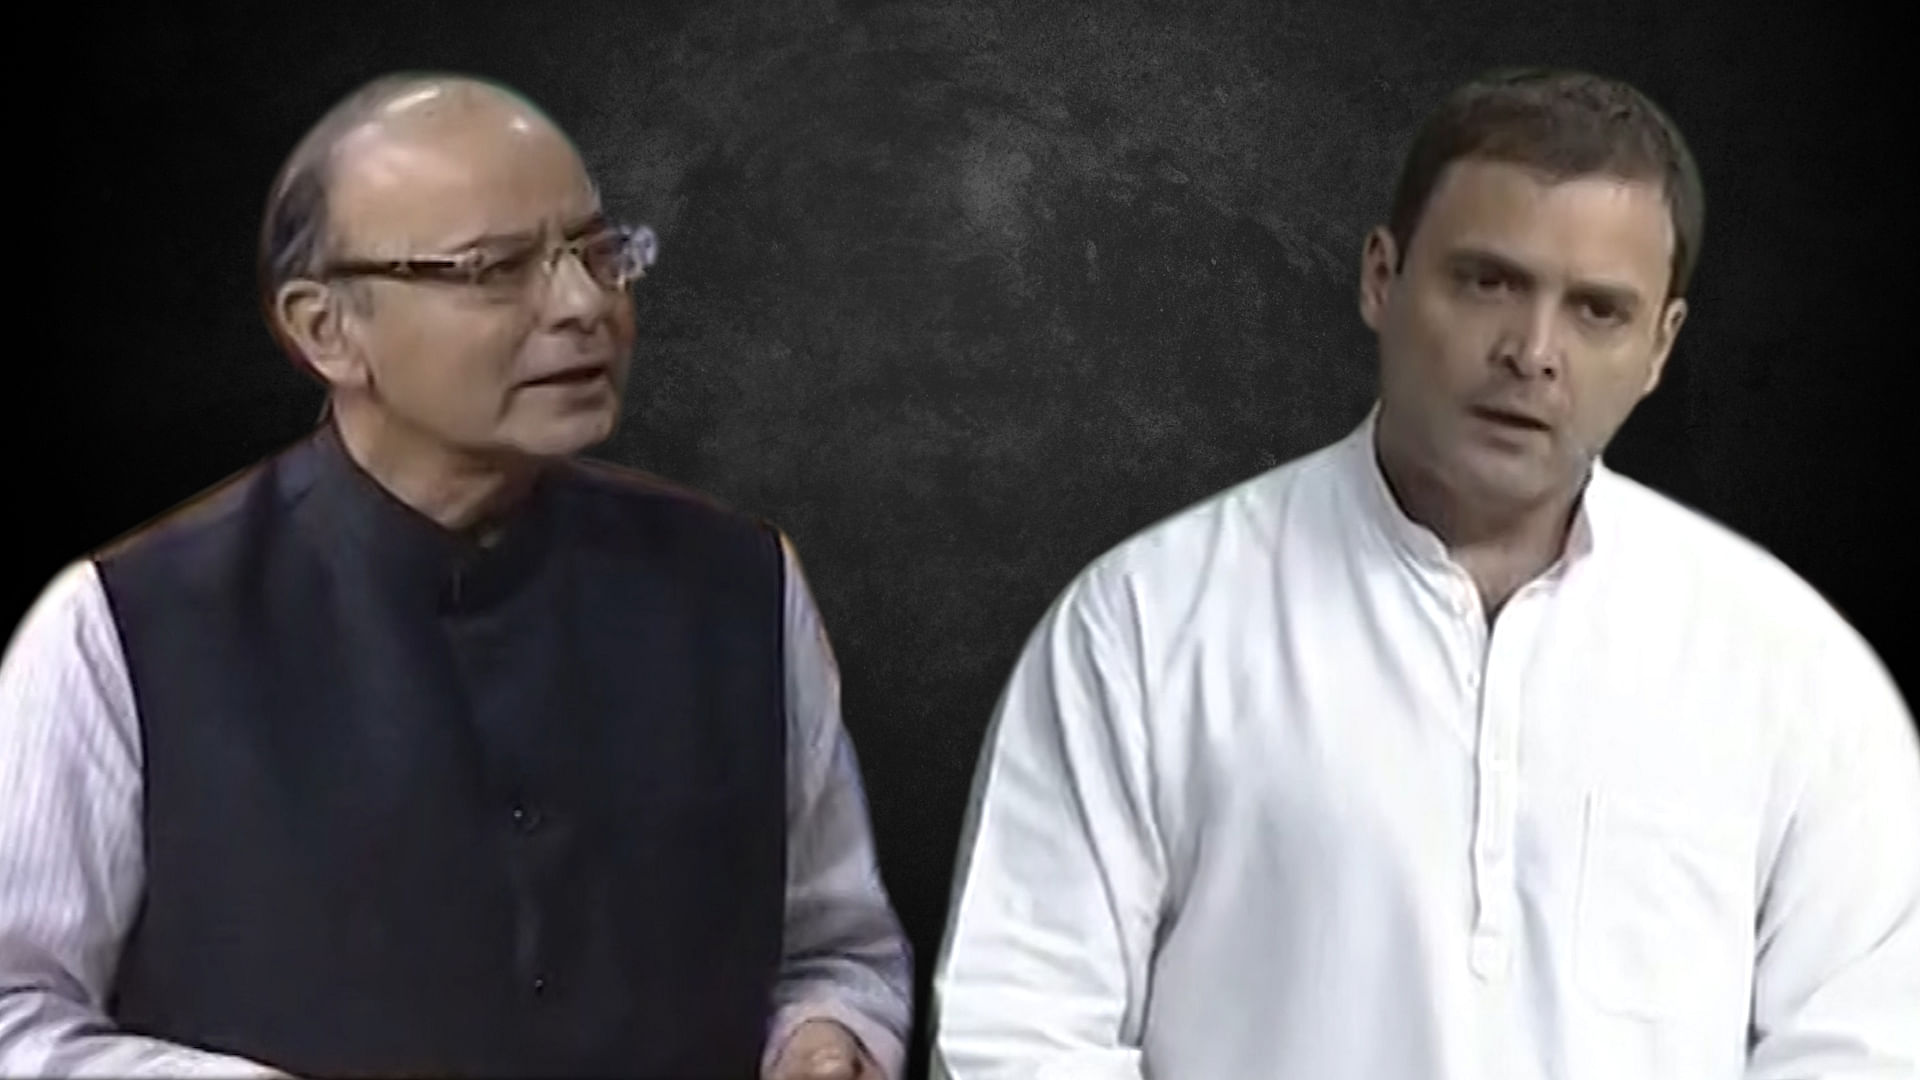 Arun Jaitley and Rahul Gandhi debate over the soaring dal prices in the country. (Photo: The Quint)